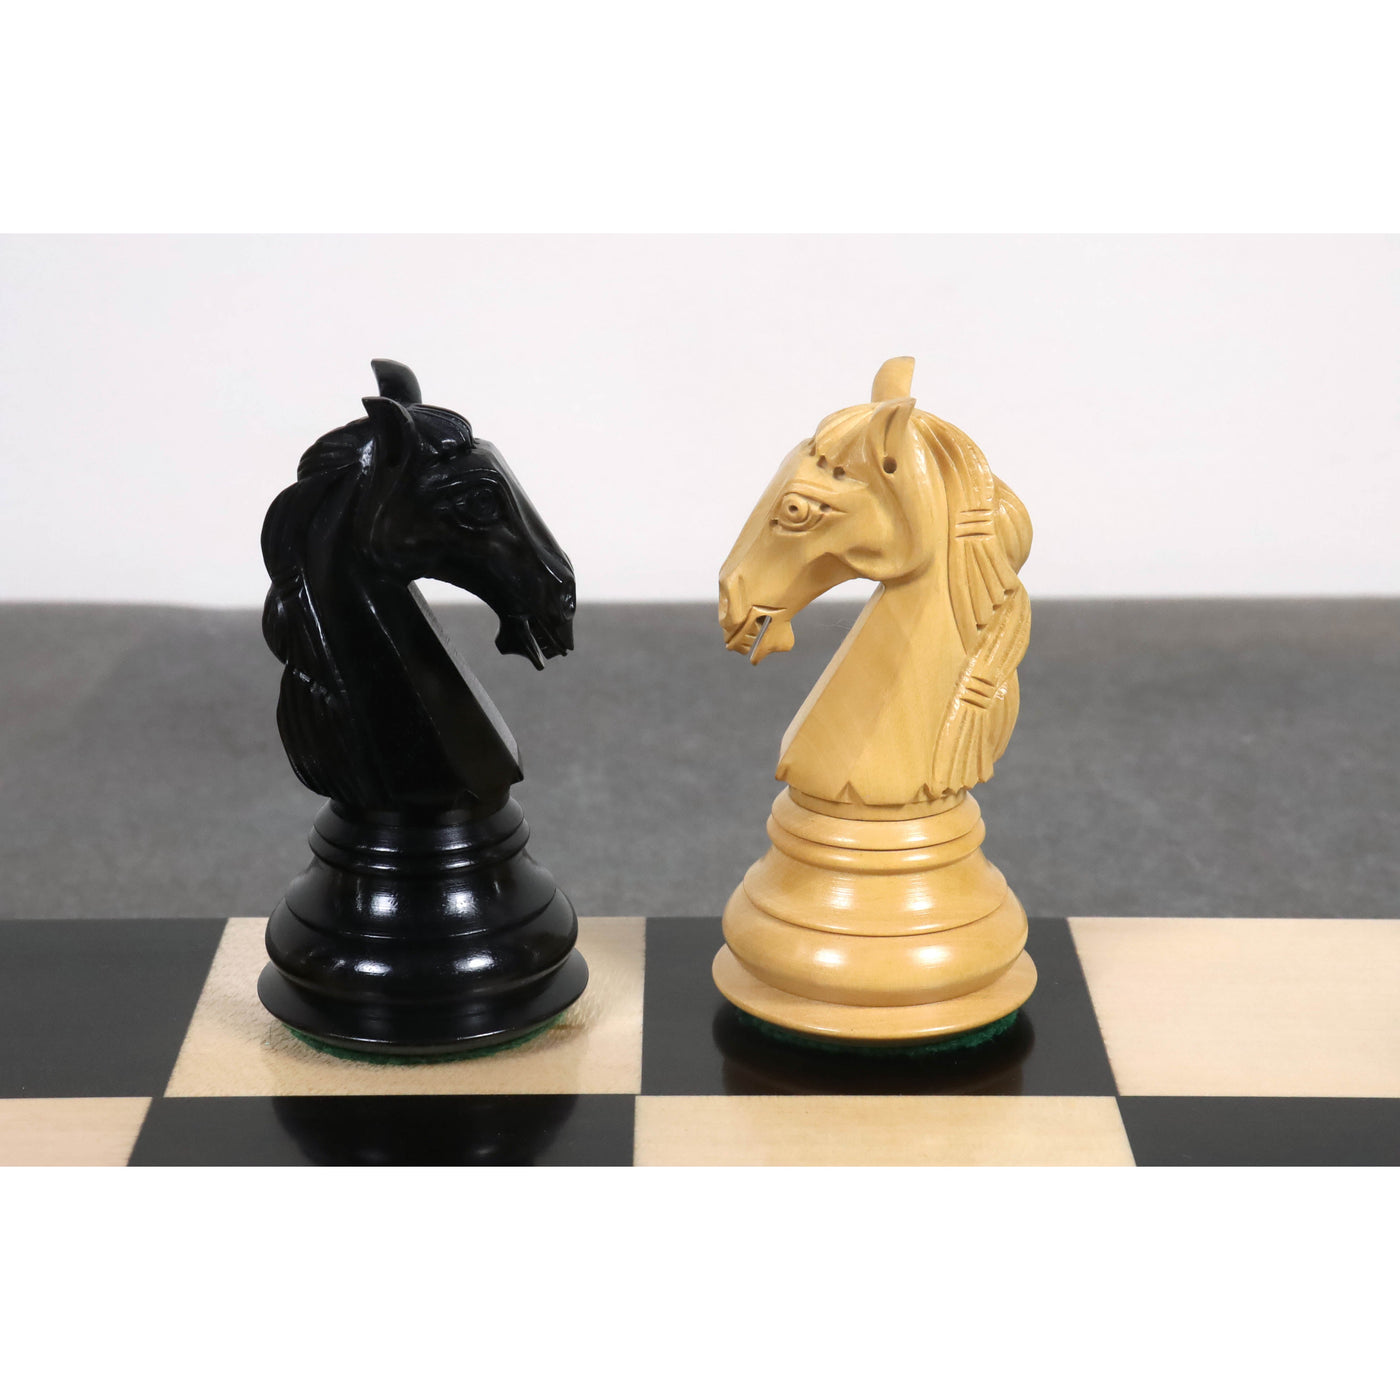 4.6″ Rare Columbian Triple Weighted Ebony Wood Luxury Chess Pieces with 23" Ebony & Maple Wood Chessboard and Leatherette Coffer Storage Box